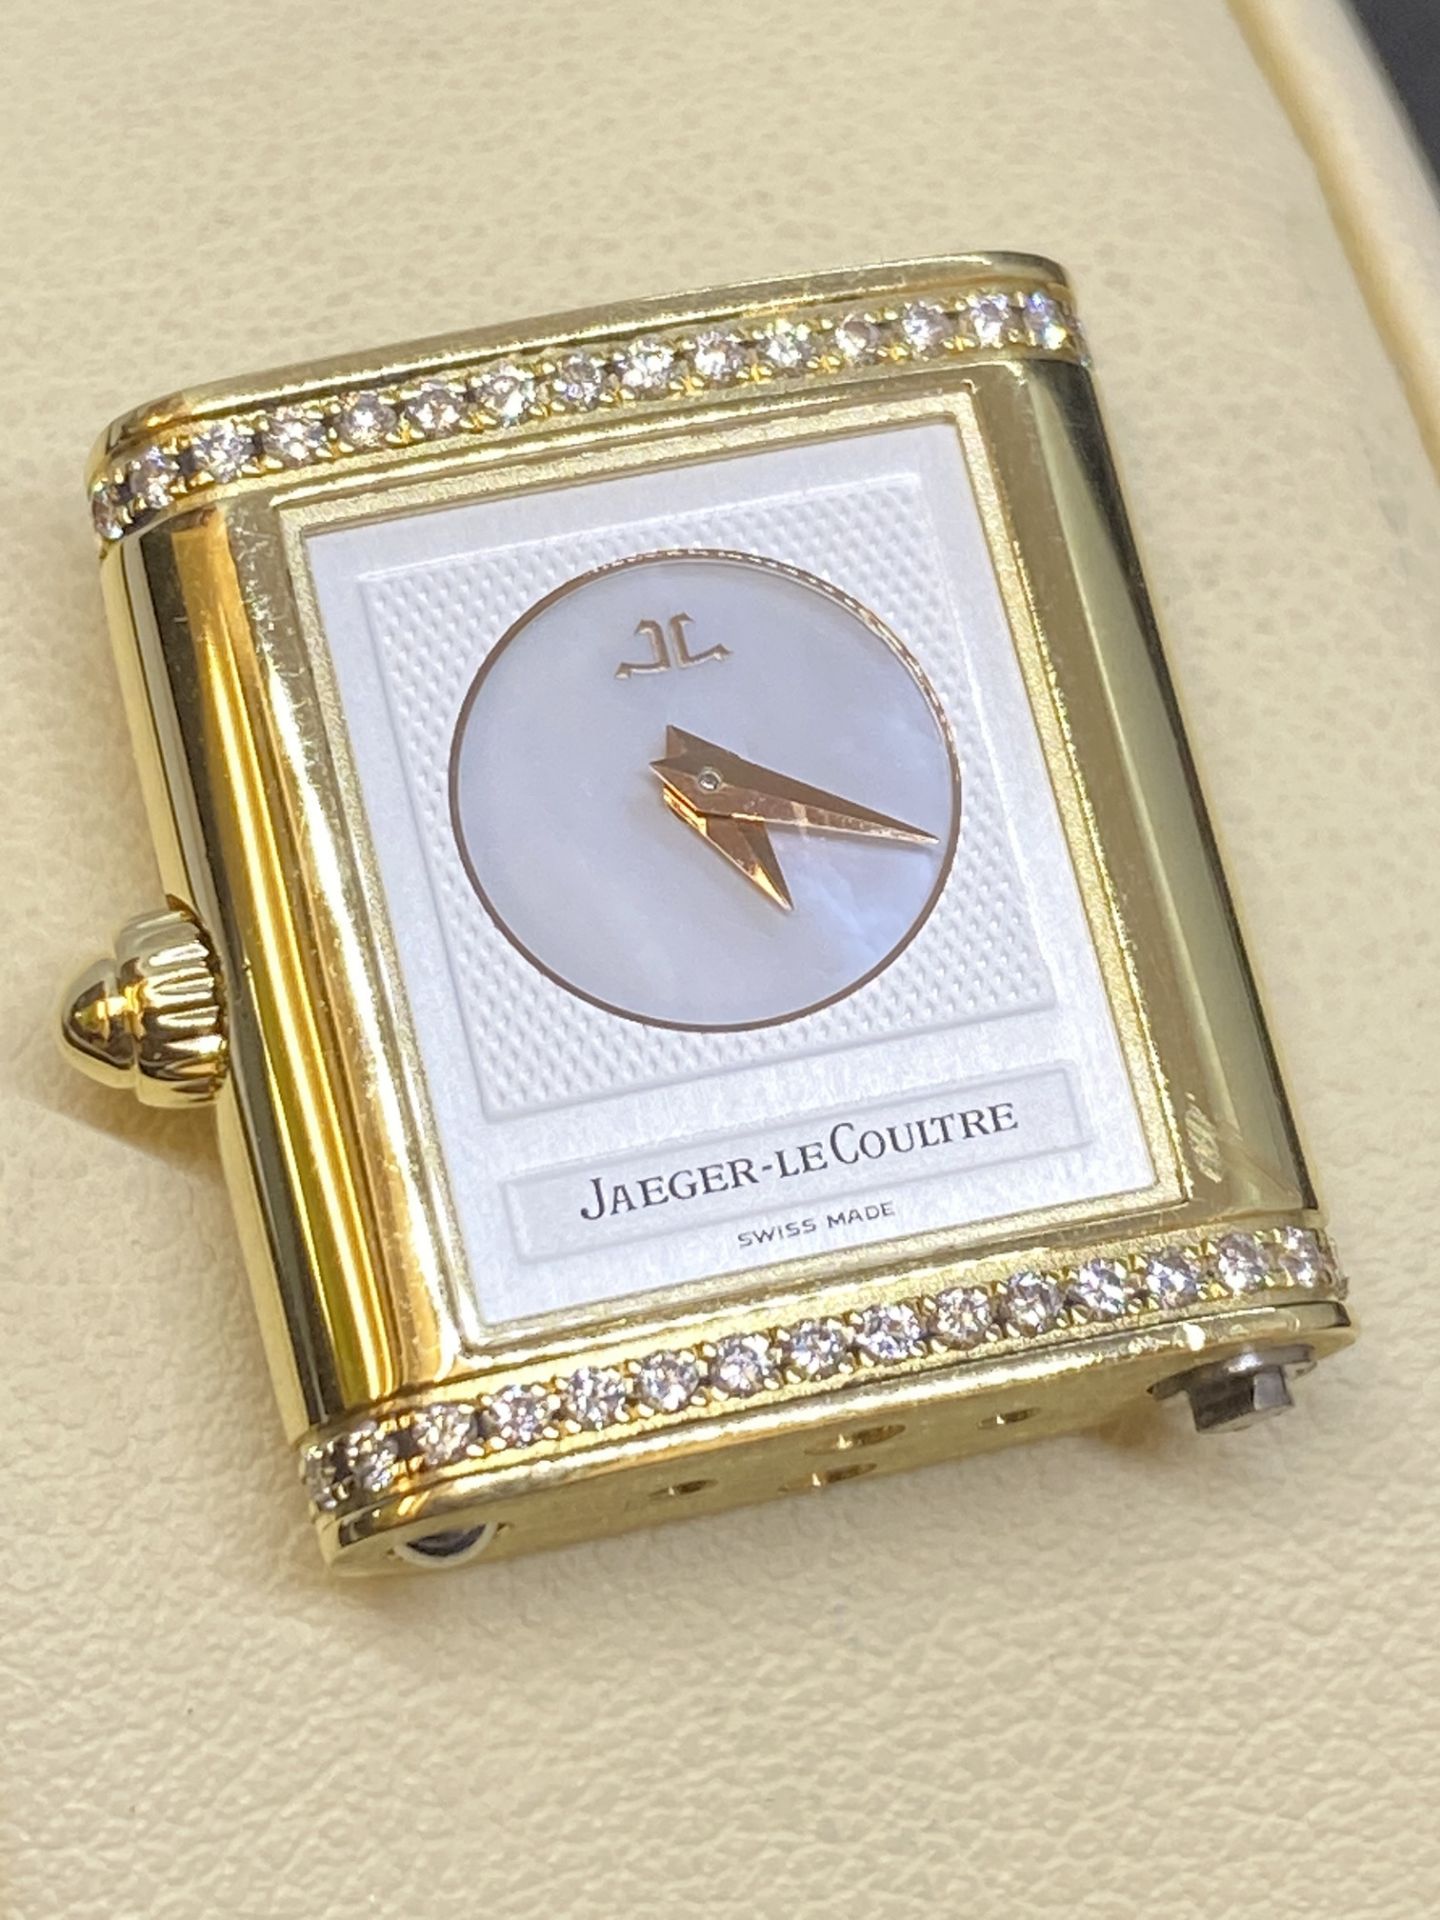 JAEGER LECOULTRE REVERSIBLE 18ct GOLD & DIAMOND WATCH BODY - Image 2 of 9